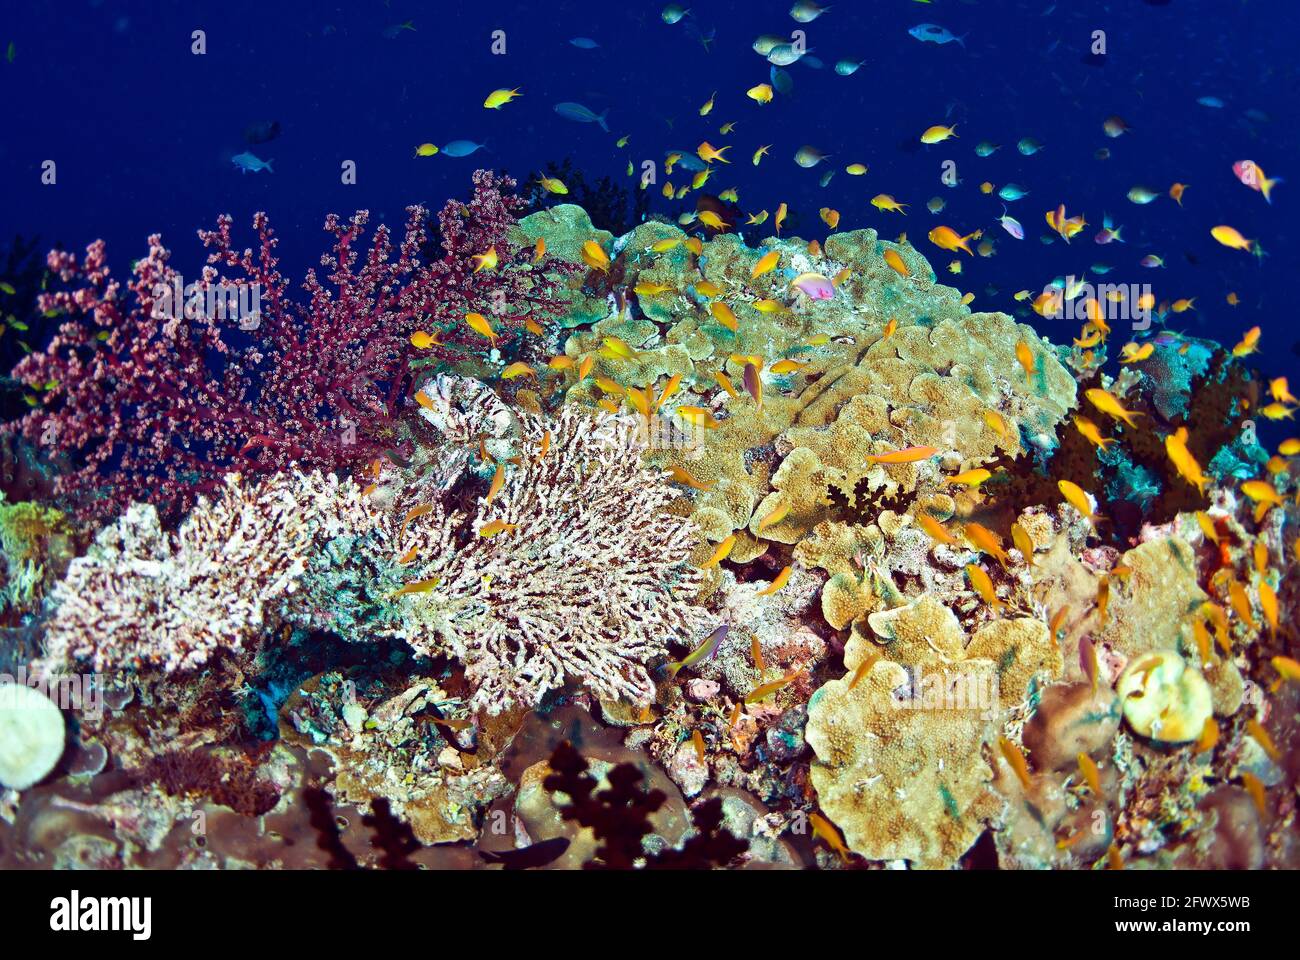 Cloud of yellow and blue chromis over lush reef covered with soft and hard corals, Solomon Islands Stock Photo